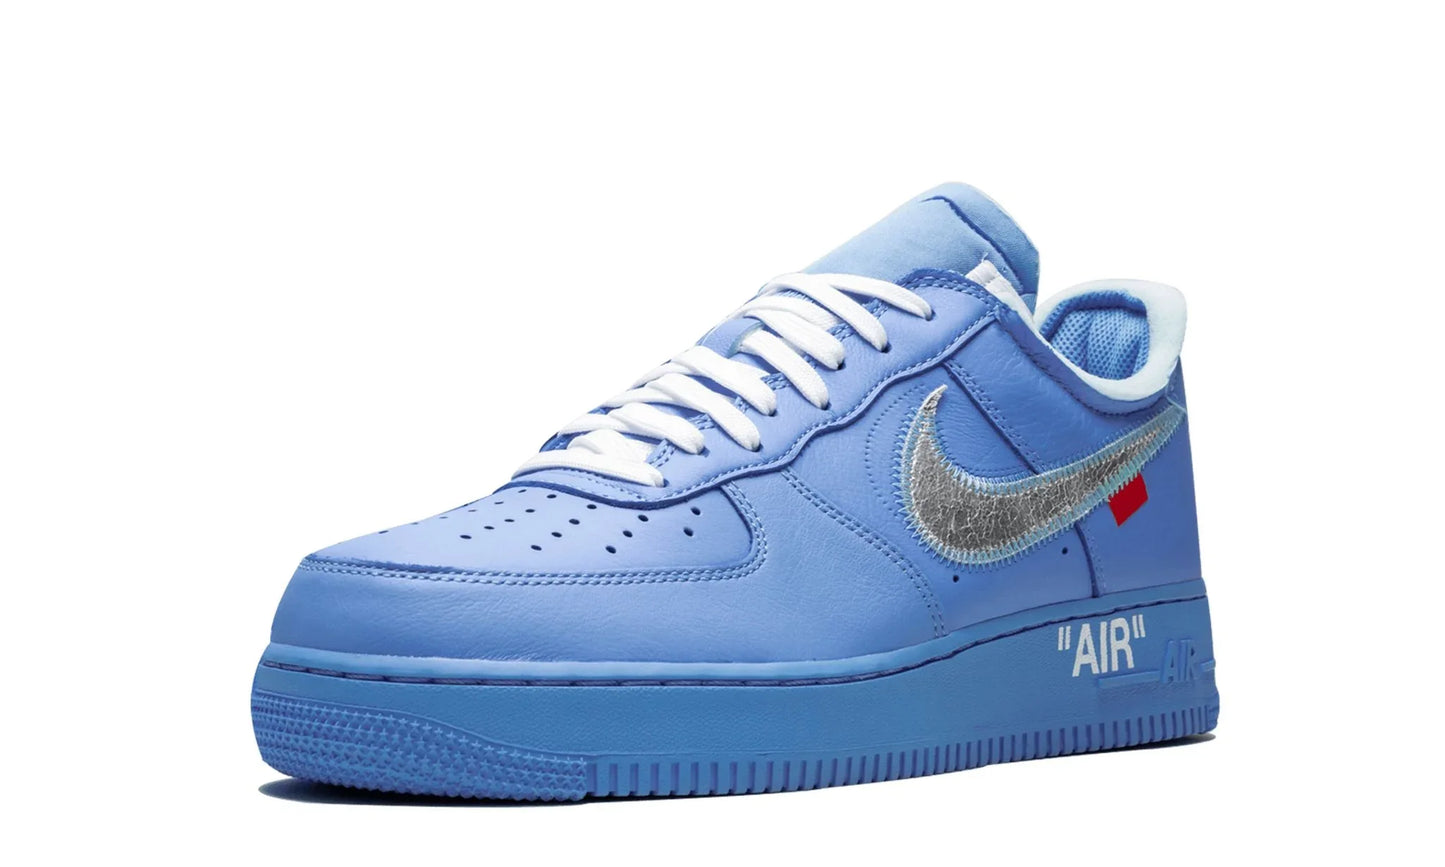 NIKE X OFF-WHITE AIR FORCE 1 LOW "Off-White - MCA"